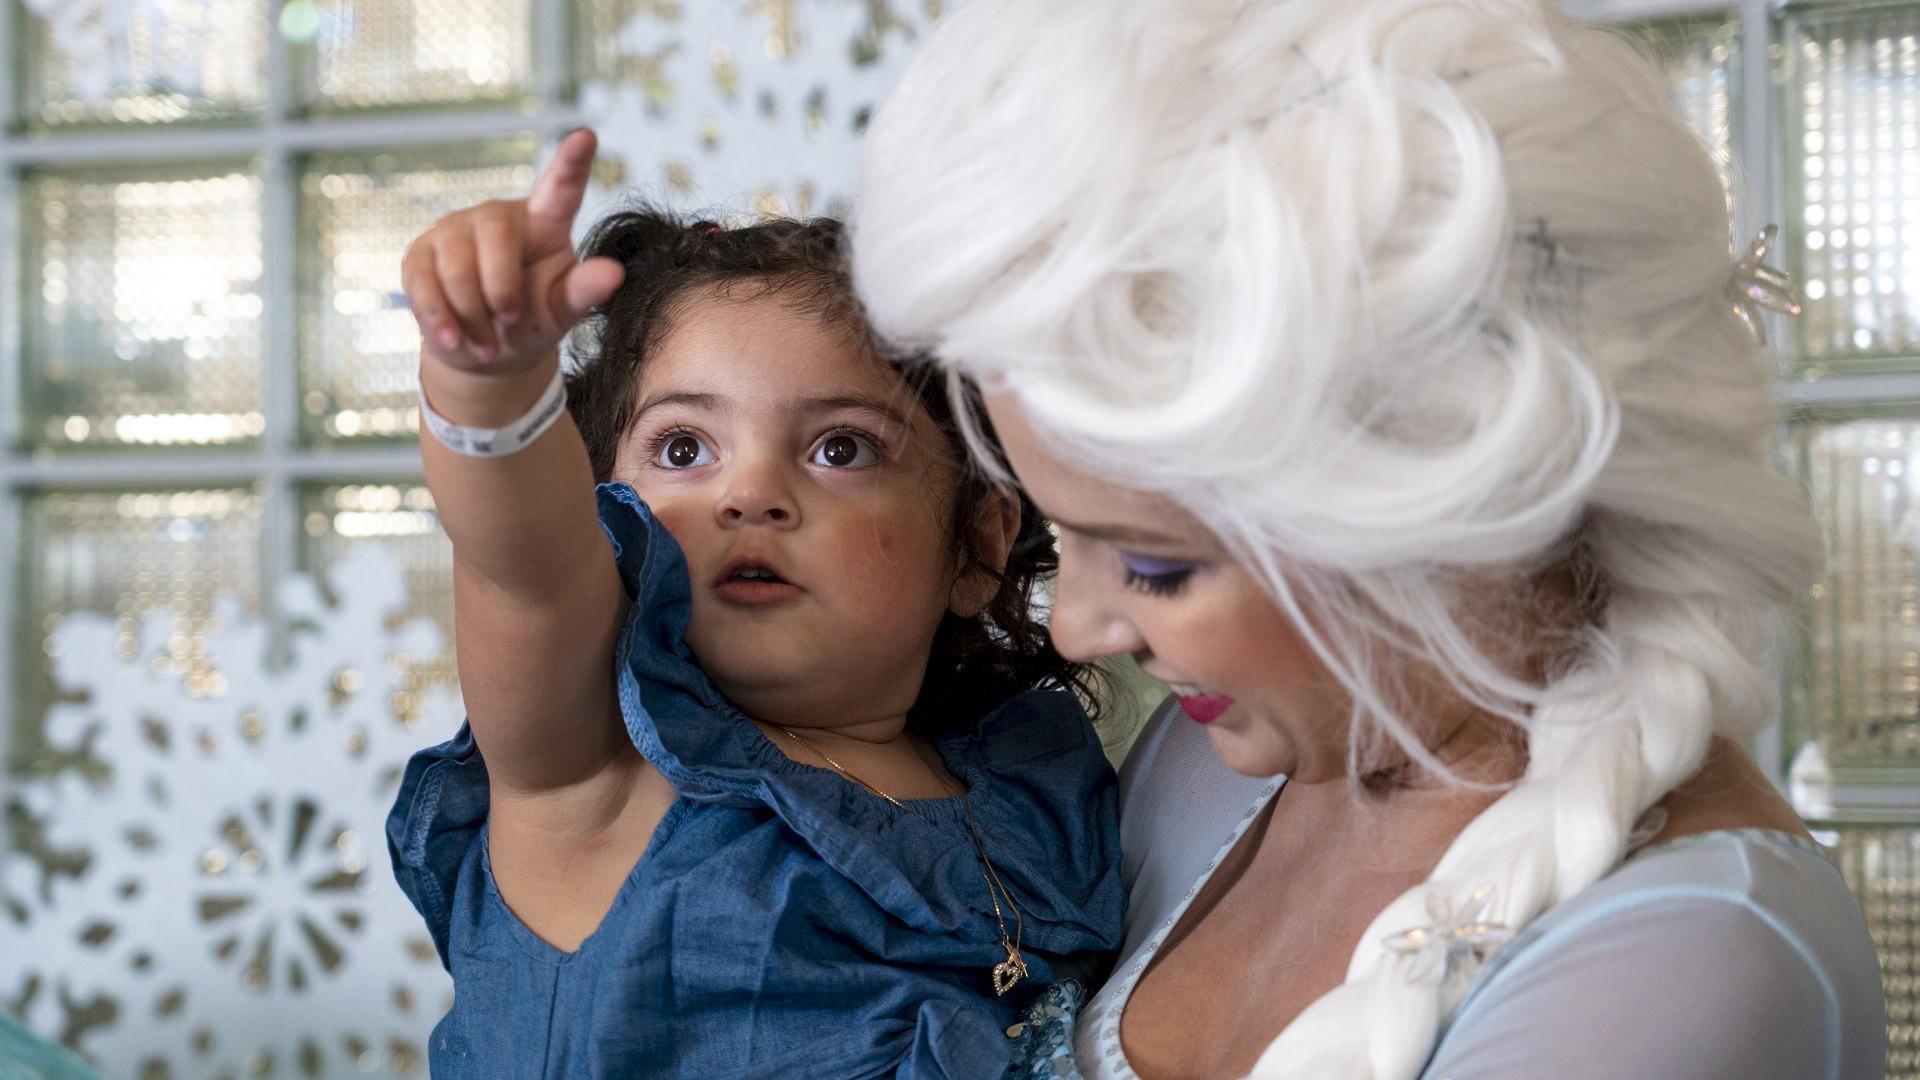 On Dec. 28, Aliyanna turned 2 years old, and so her care team decided to celebrate the monumental milestone in a special way: with a winter wonderland birthday party.